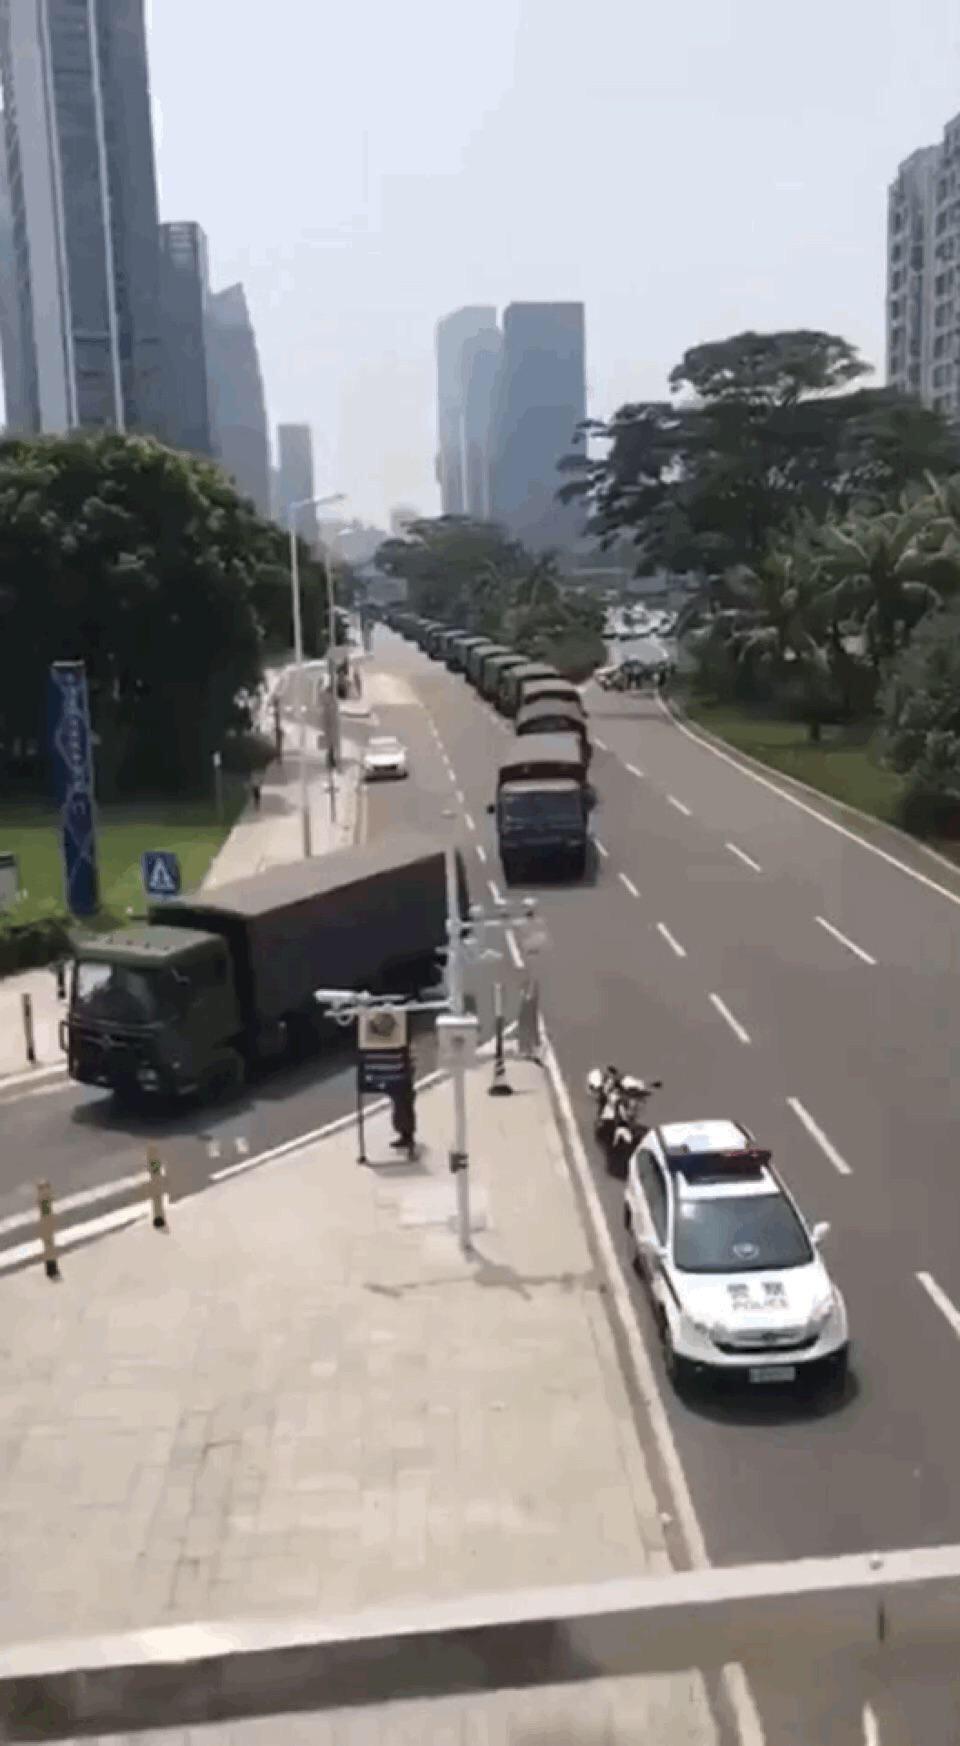 Just the Chinese army mobilizing around Hong Kong... nothing to see here, avert your eyes, etc.